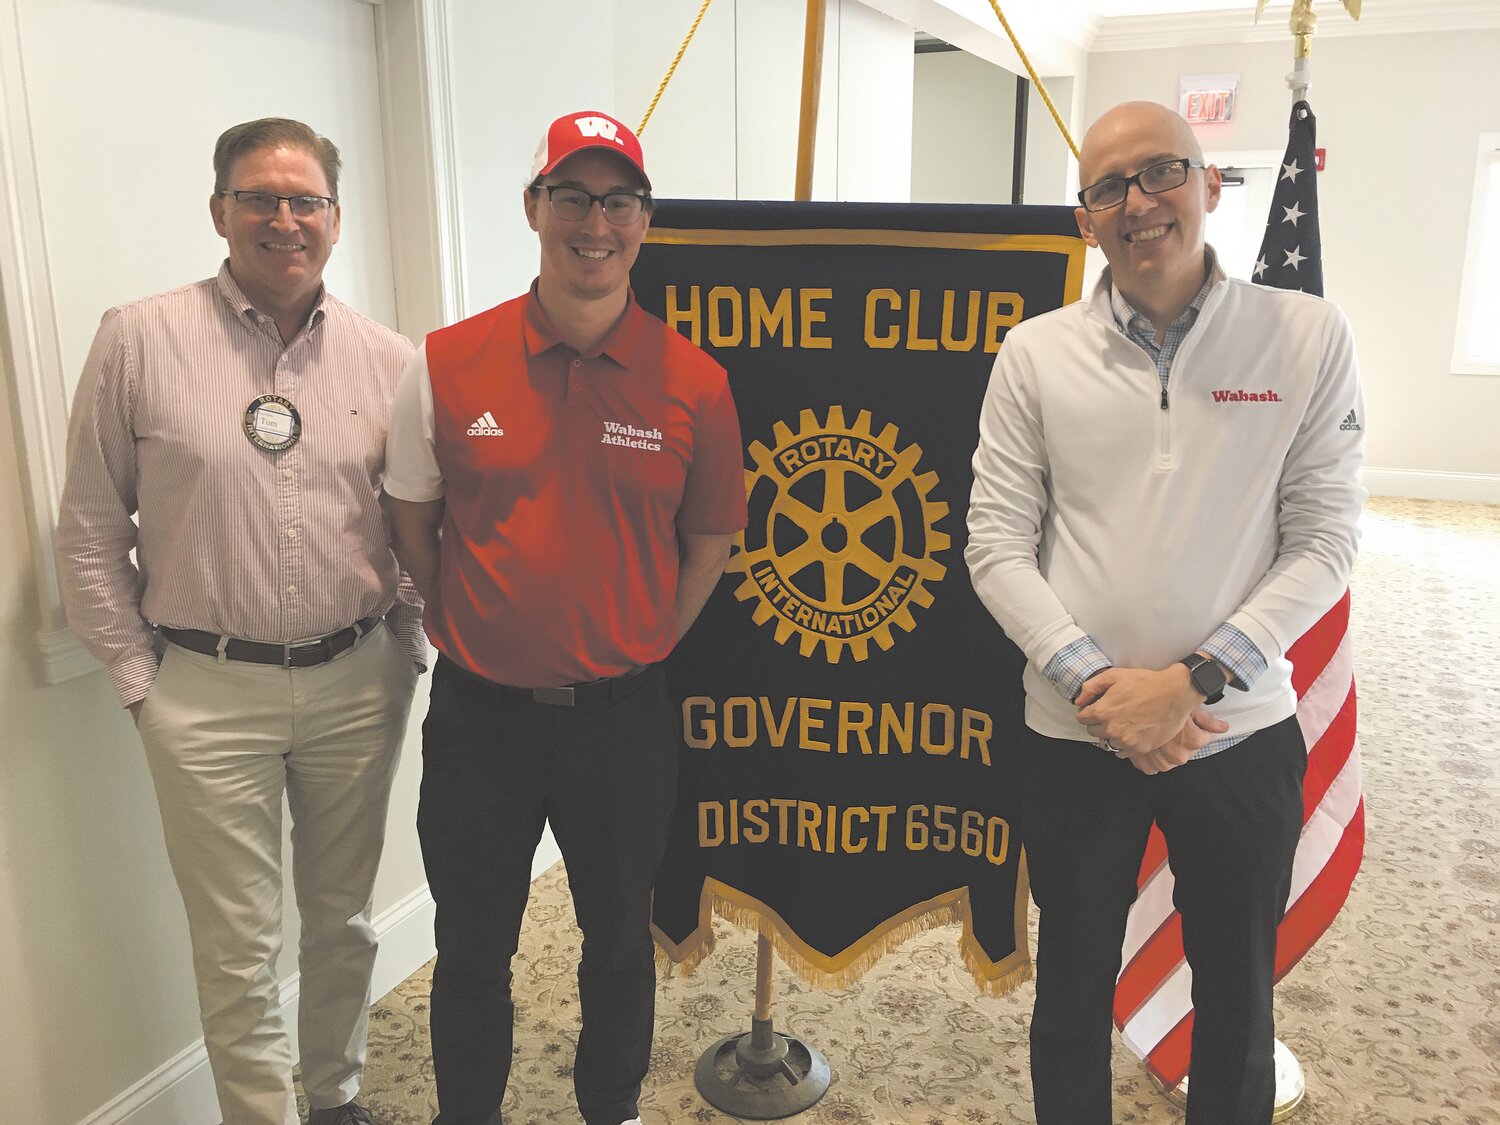 Two speakers from Wabash College, Athletic Director Matt Tanney, right, and Assistant Equipment Manager, Game Operation and Facilities Manager Clark Tinden, center, spoke to the Rotary Club at their noon meeting. The men are pictured with Rotarian Tom Klein. Tanney has been AD for six years and Tinden will have been at his position for a year in October. Both men are Wabash College graduates. In the fall, soccer, cross-country and football are the sports requiring the ADs attention. The football roster shows 125 young men competing for positions on the team. The first home game is Sept. 23 and is Homecoming. For some Wabash men the "Monon Bell Game" on Nov. 11 is the most important game of the year. Clark employs around 40-50 students a year to help keep the Allen Center and other facilities open for practice and events.